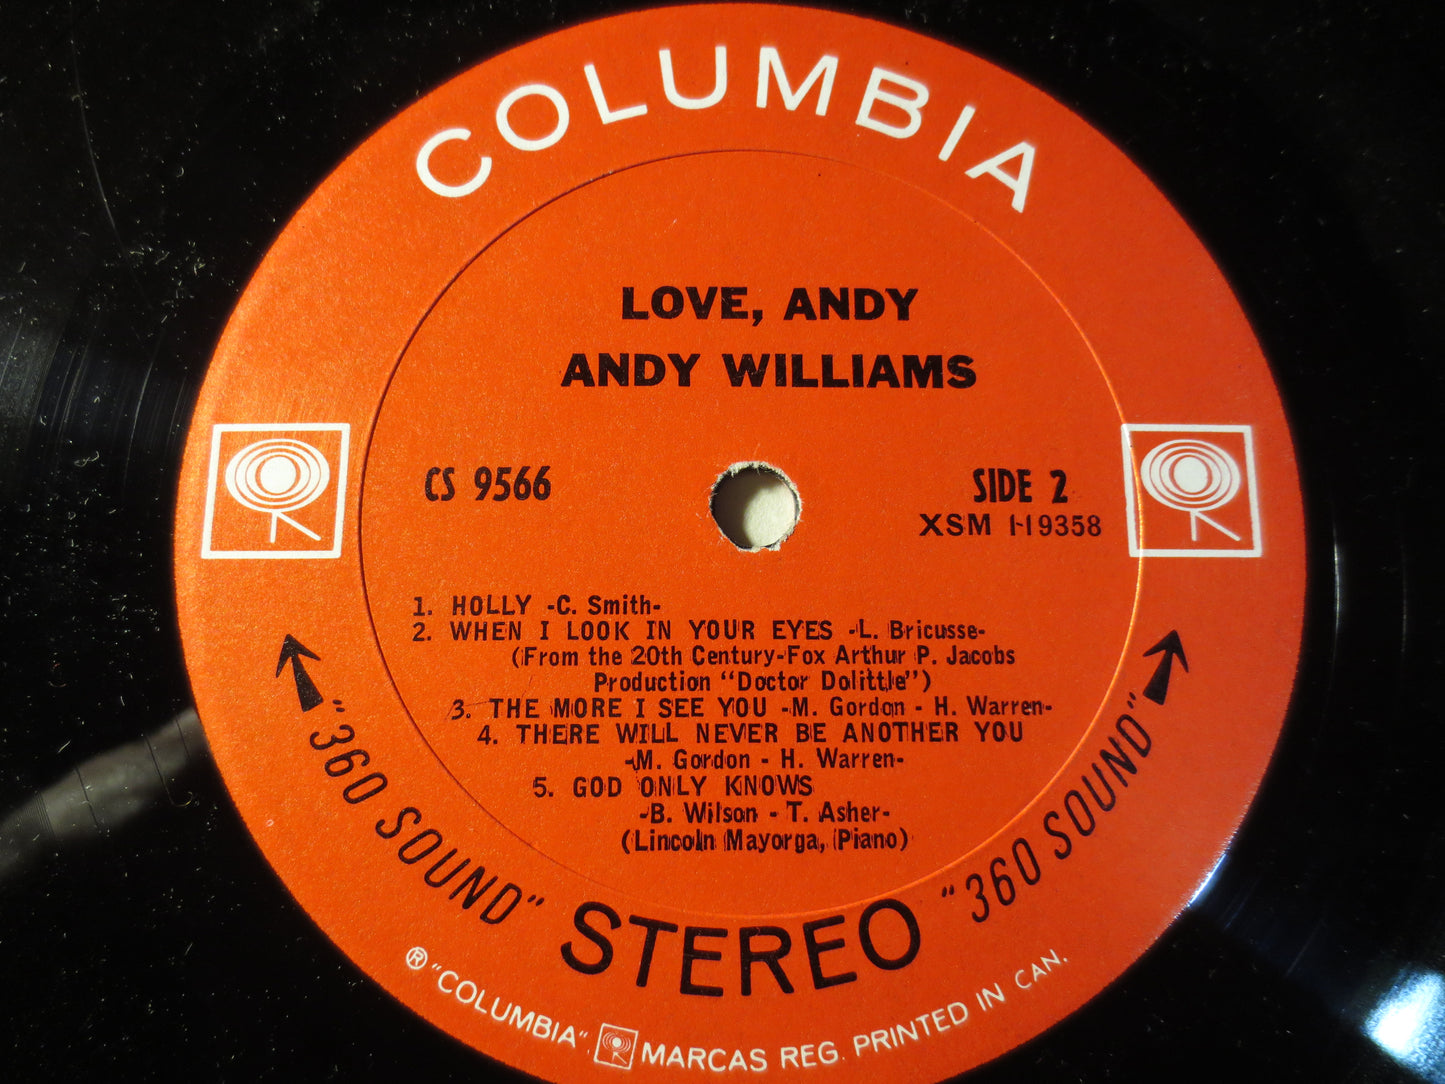 ANDY WILLIAMS, LOVE Andy, Pop Record, Jazz Record, Vintage Vinyl, Record Vinyl, Records, Vinyl Record, Vinyl, 1967 Records